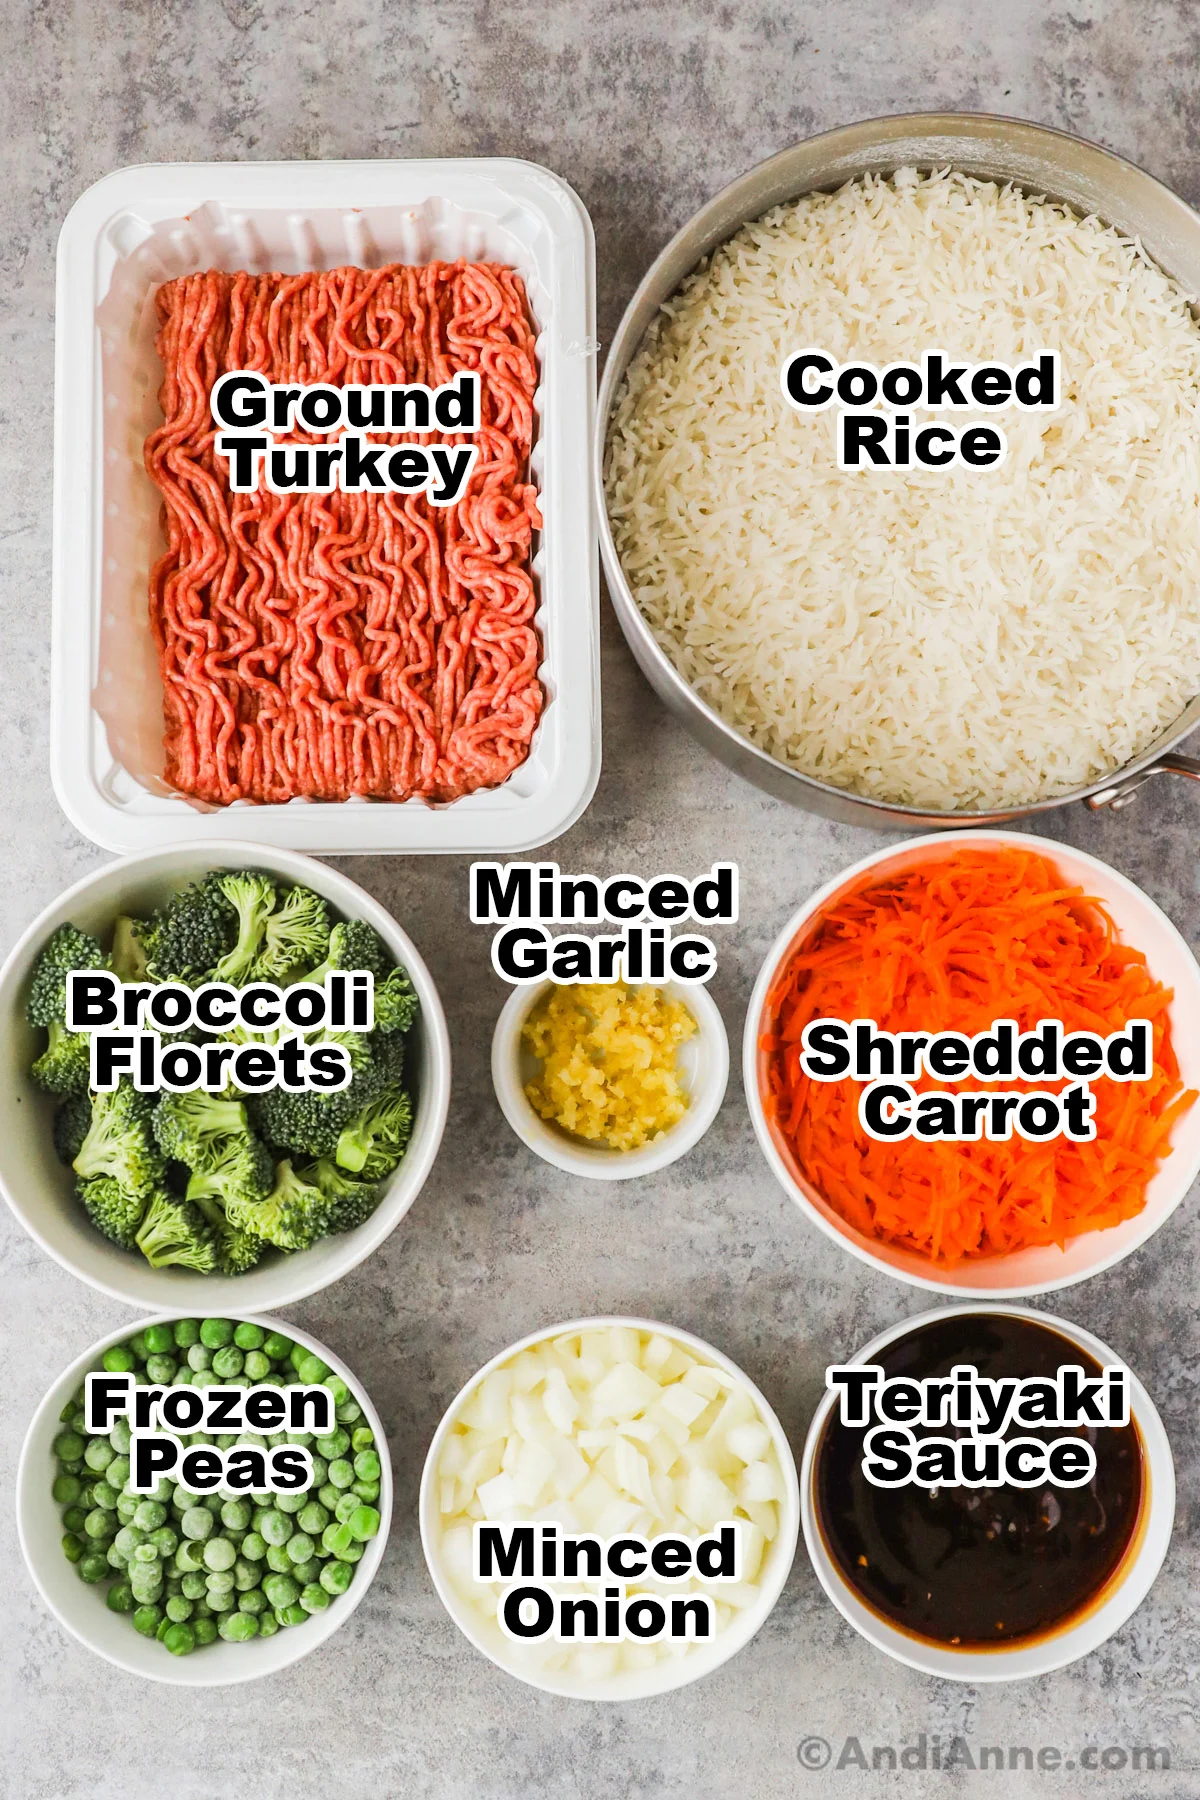 Recipe ingredients including a pot of white rice, container of raw ground turkey, bowls of broccoli florets, minced garlic, shredded carrot, frozen peas, minced onion and teriyaki sauce.